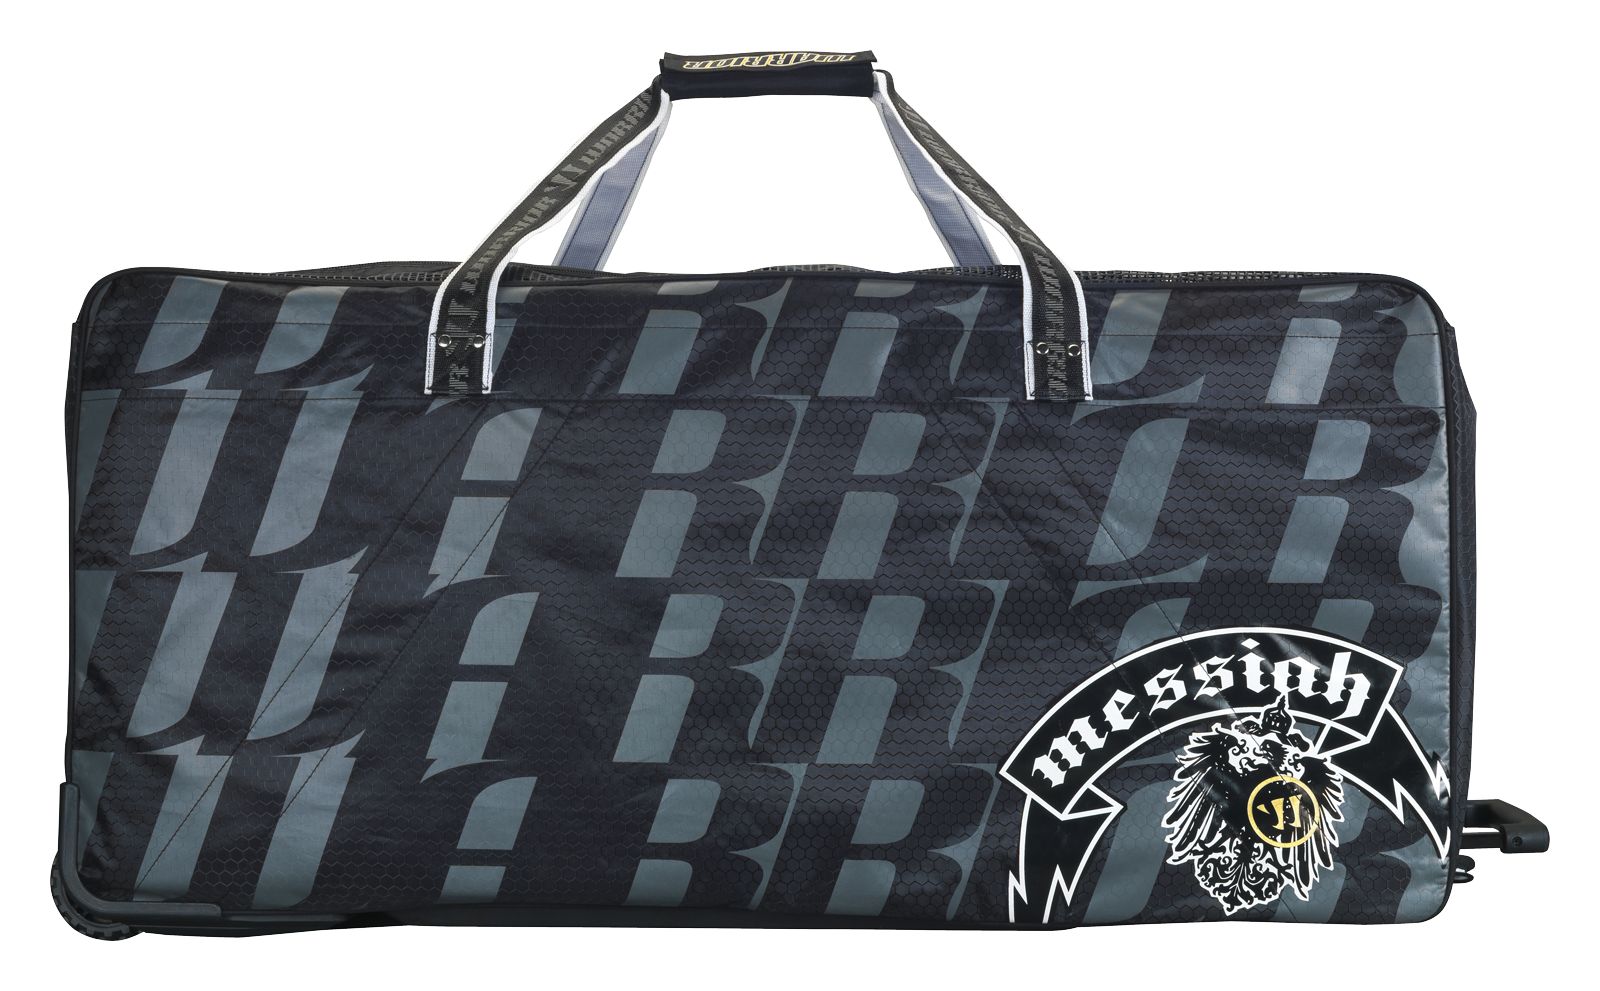 Messiah Goalie Wheel Bag, Navy with White image number 0